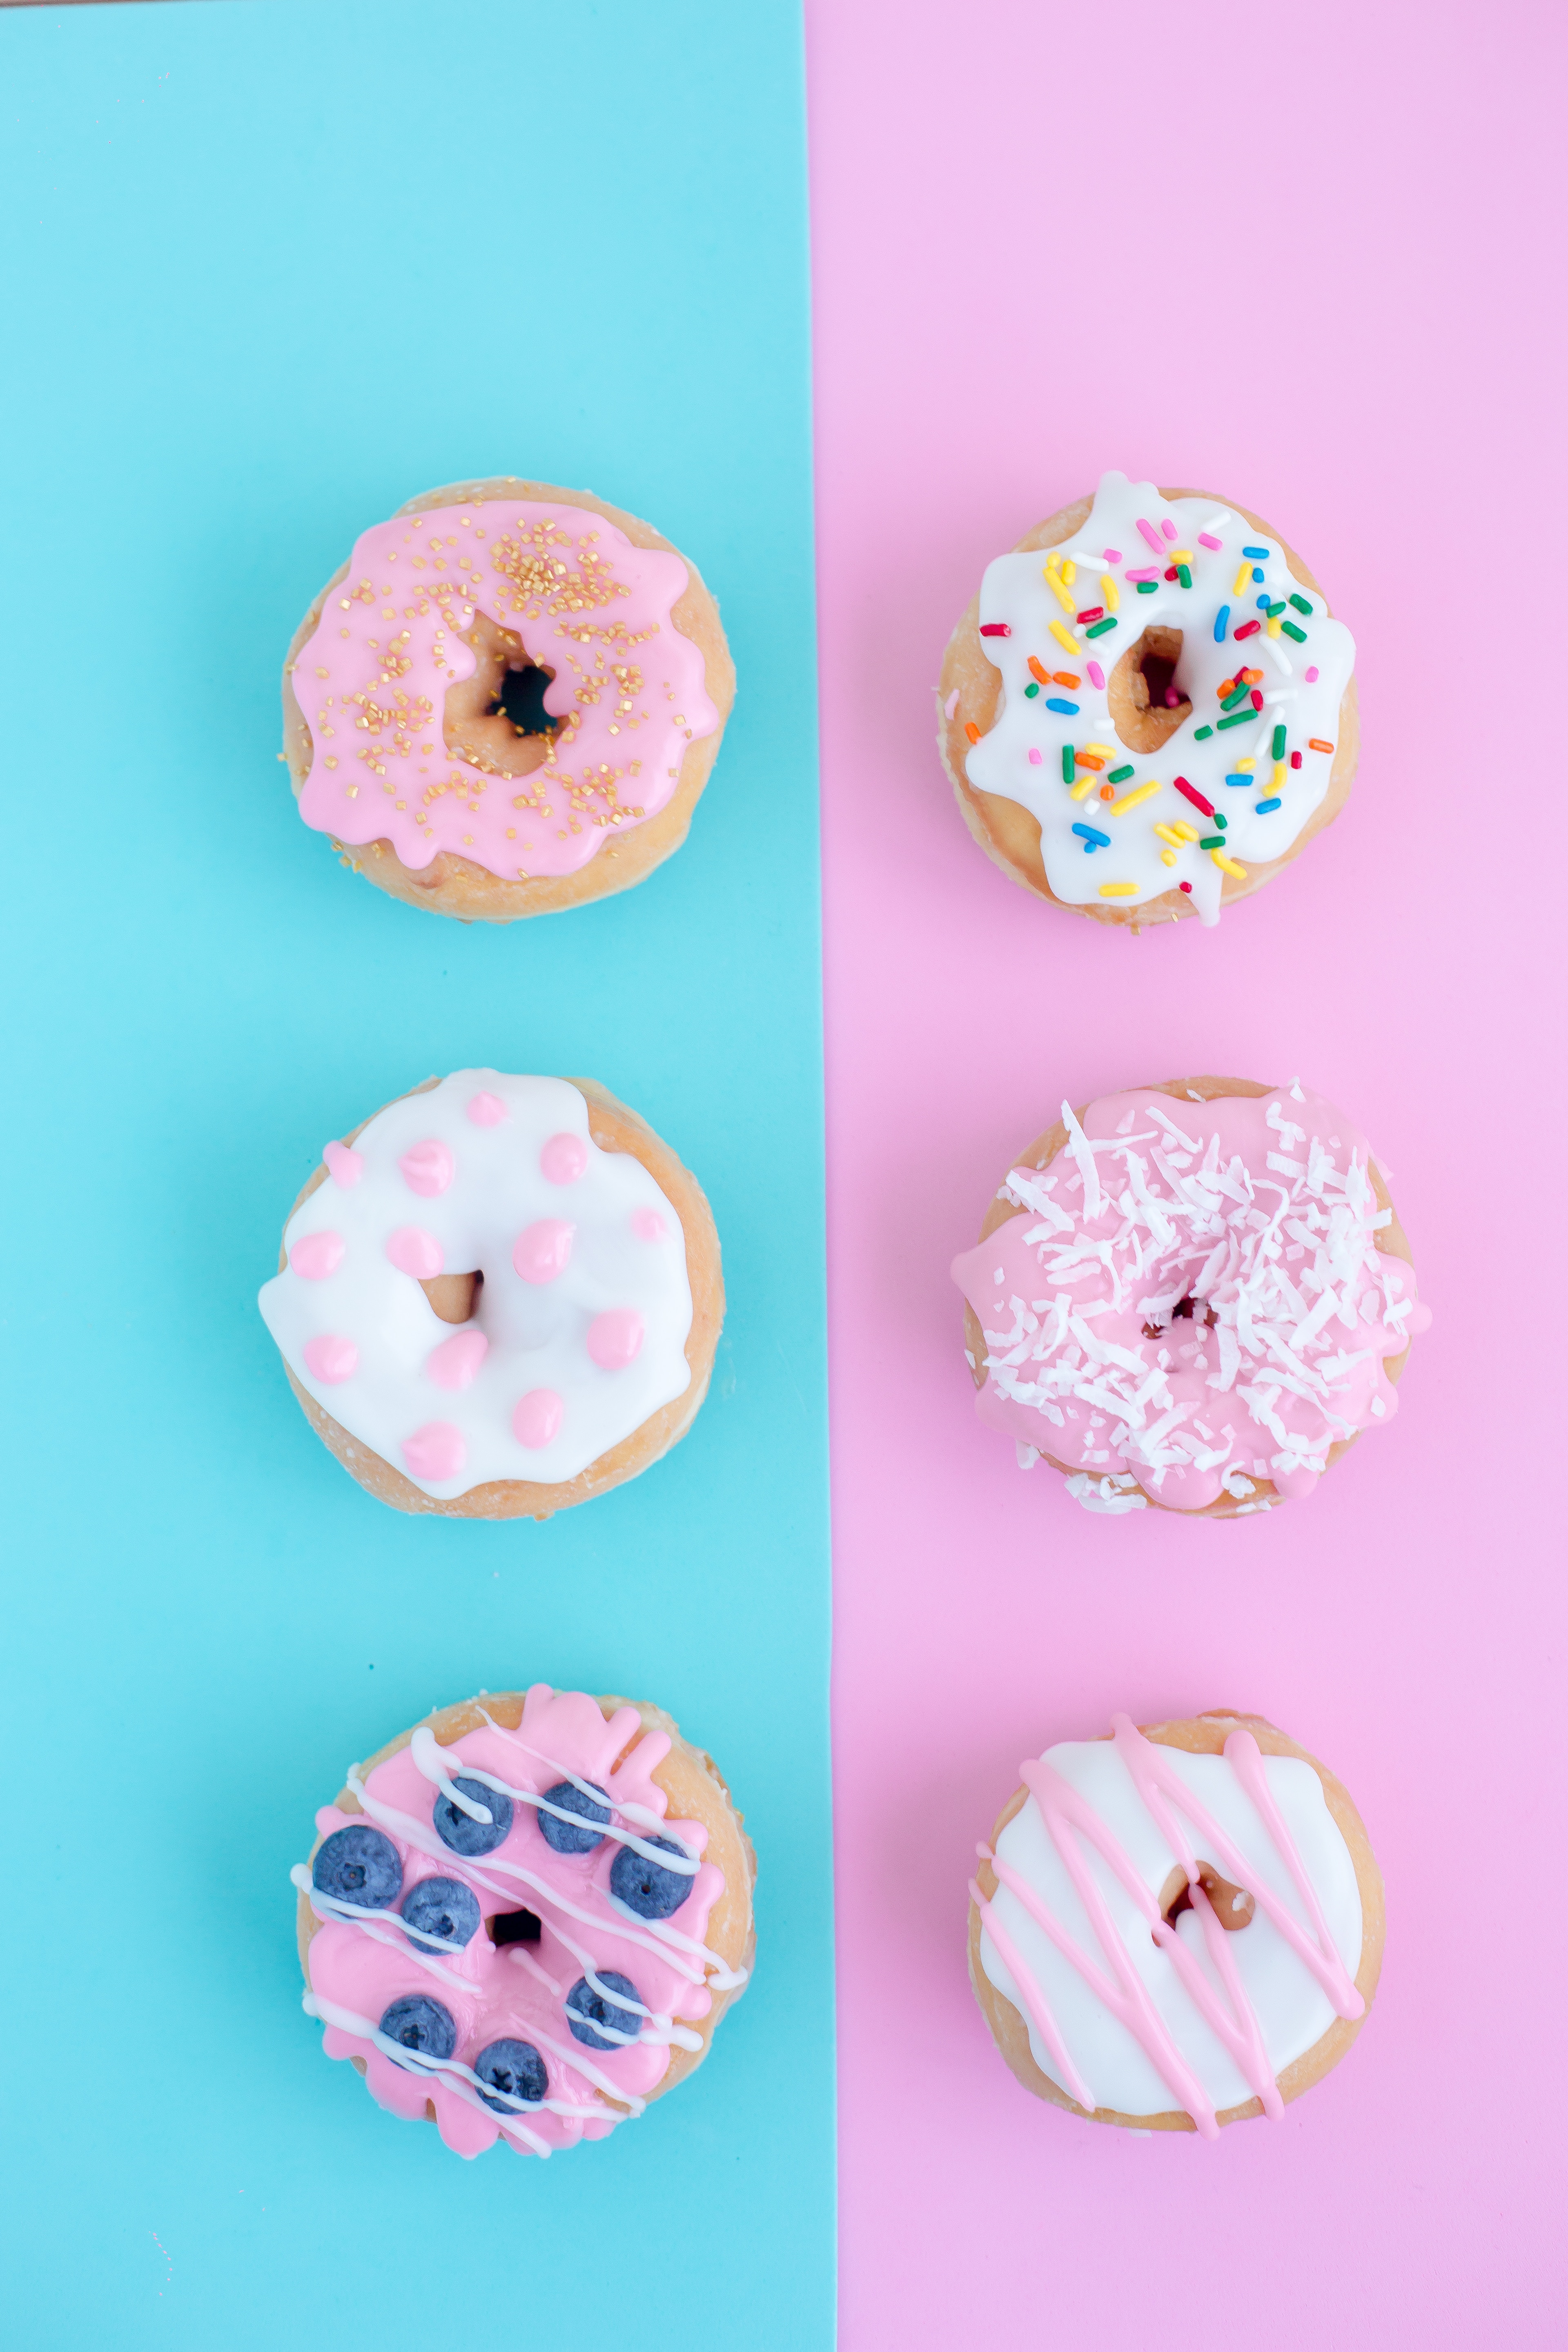 Doughnuts On Turquoise And Pink Background Pixeor Stock